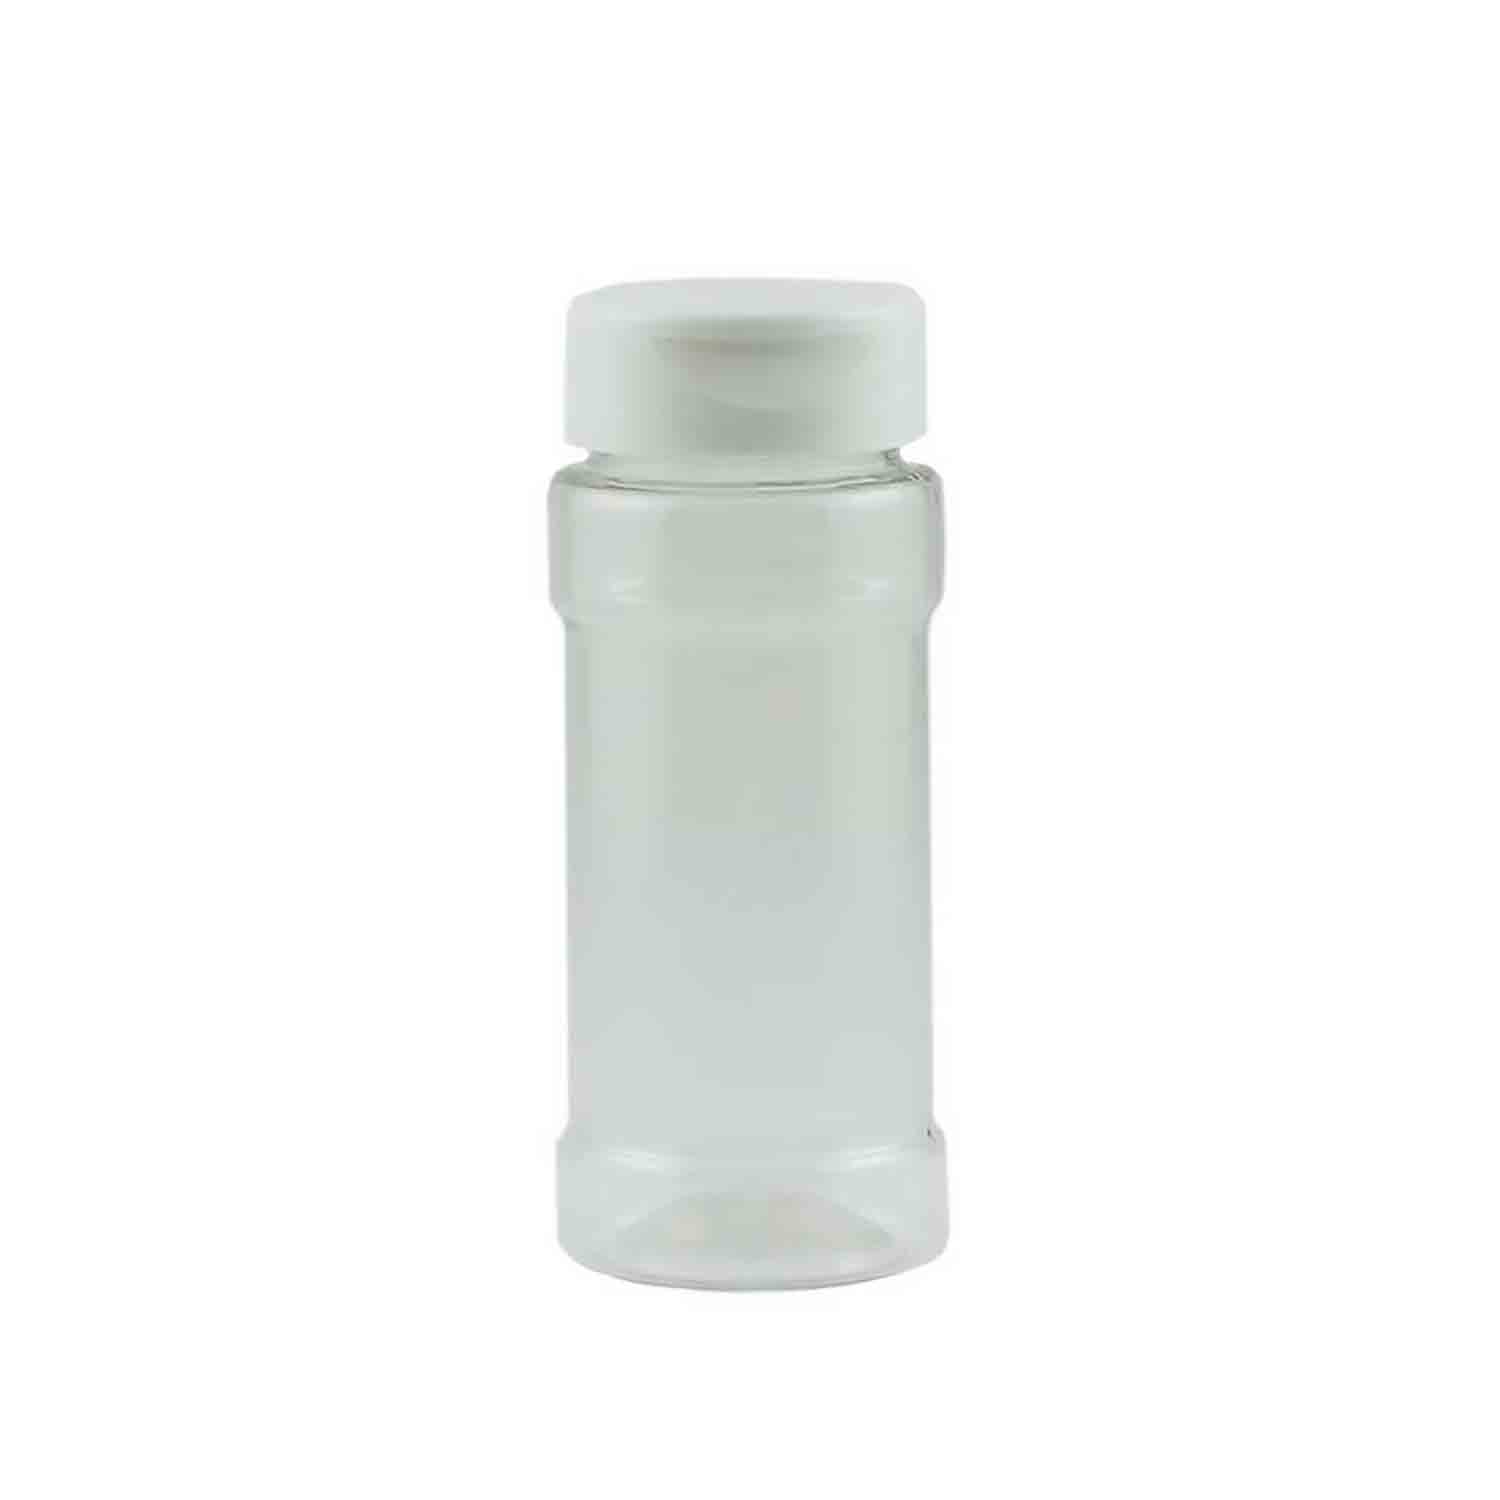 Small Shaker Bottle with Lid - Country Kitchen SweetArt